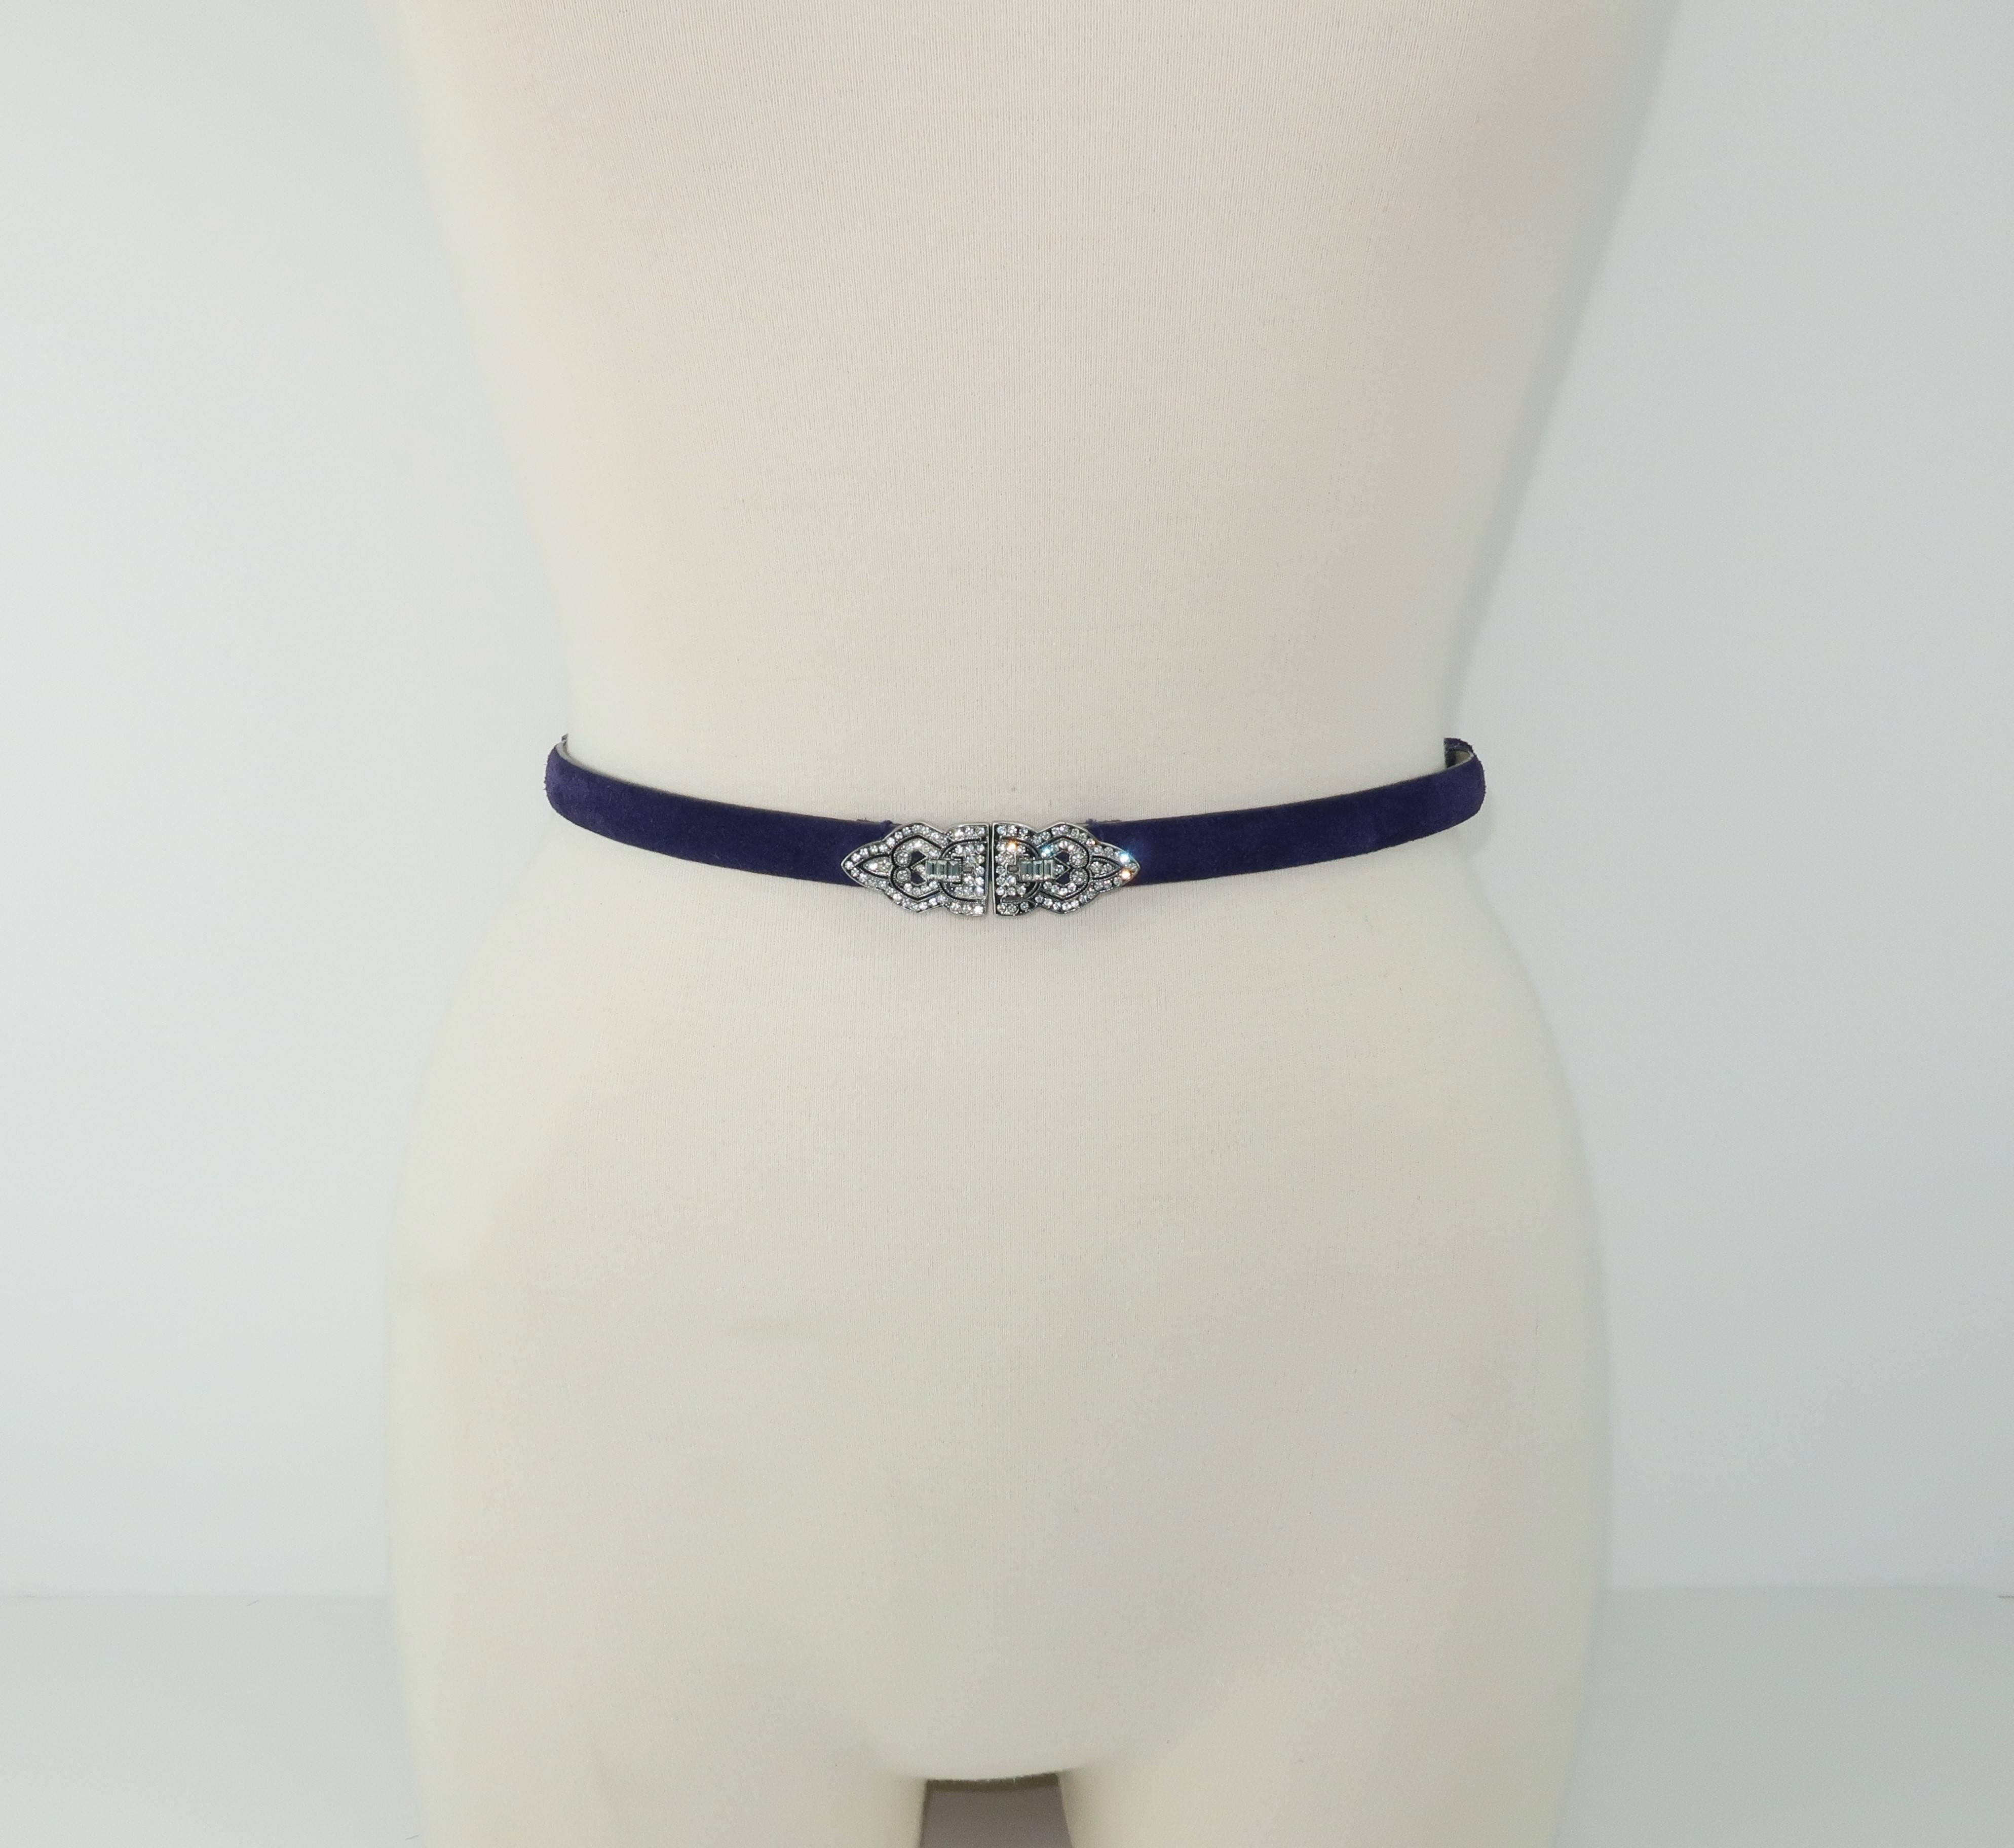 Ralph Lauren puts a contemporary spin on a classic art deco design with this rhinestone encrusted buckle and royal purple suede belt.  The 'skinny' design is perfect for adding an accent to a dress or cinching the waist of wide leg trousers for an